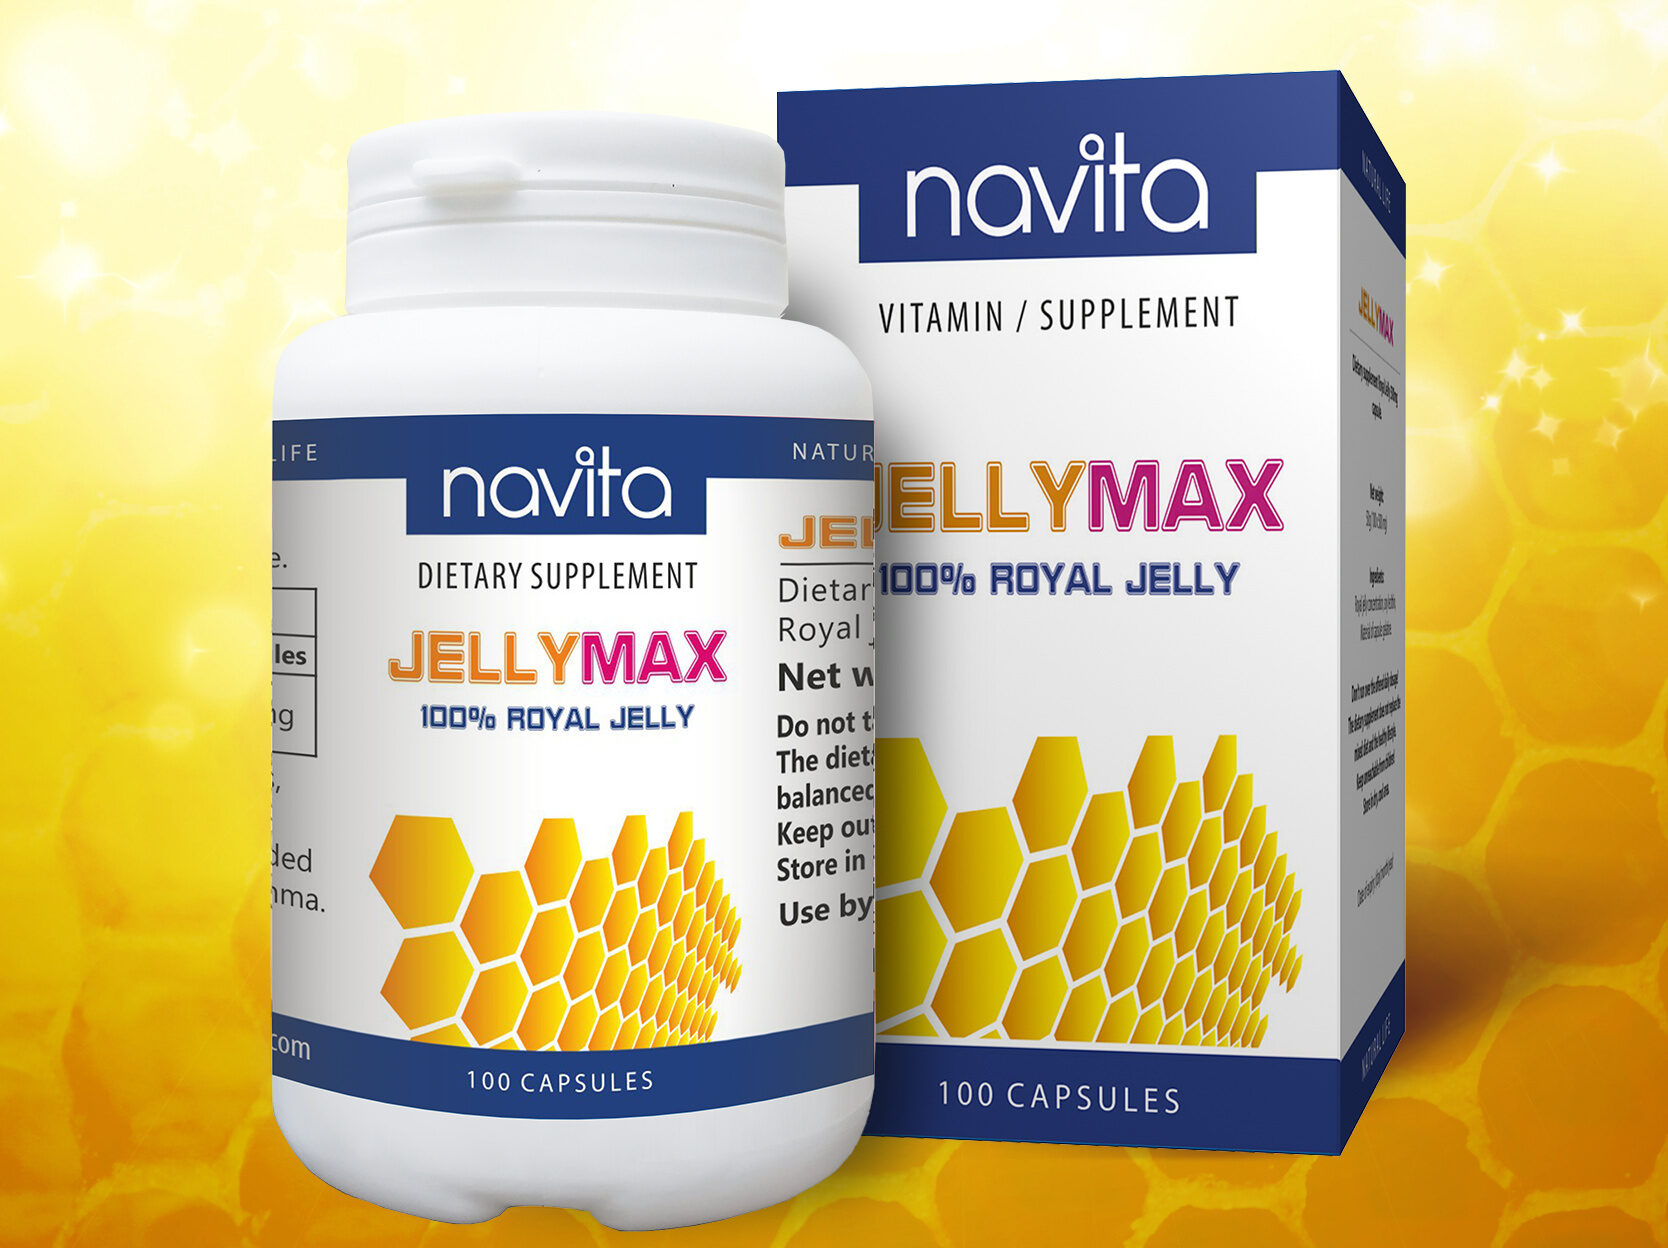 JELLYMAX 100% ROYAL JELLY - Product